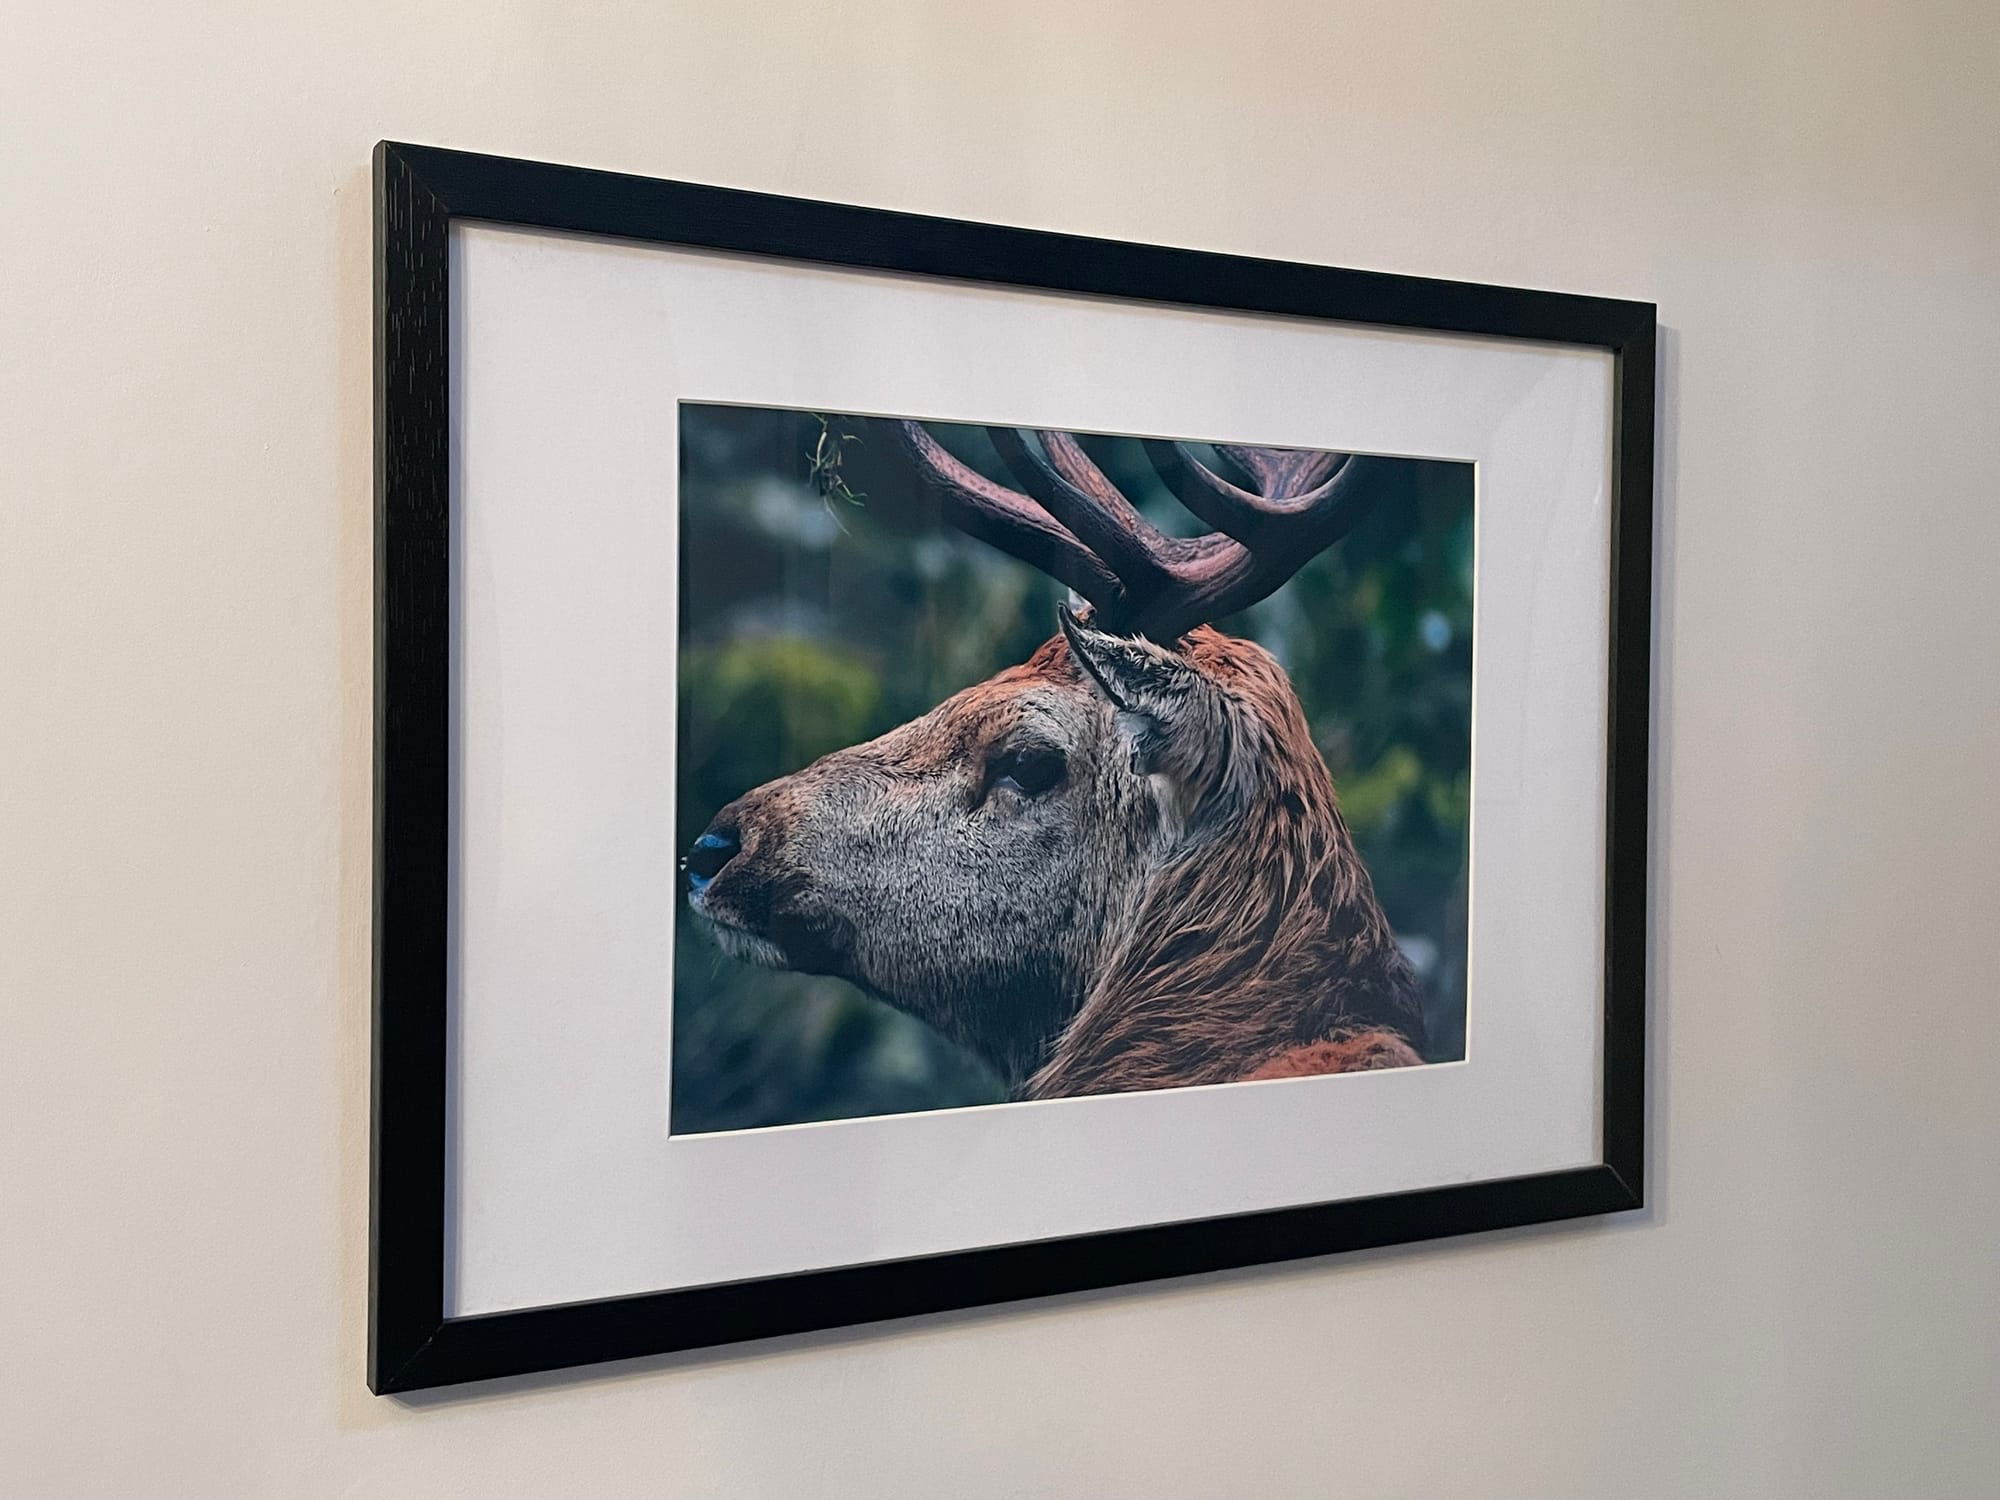 Photography size 210mm x 297mm with mount displayed in A3 frame.